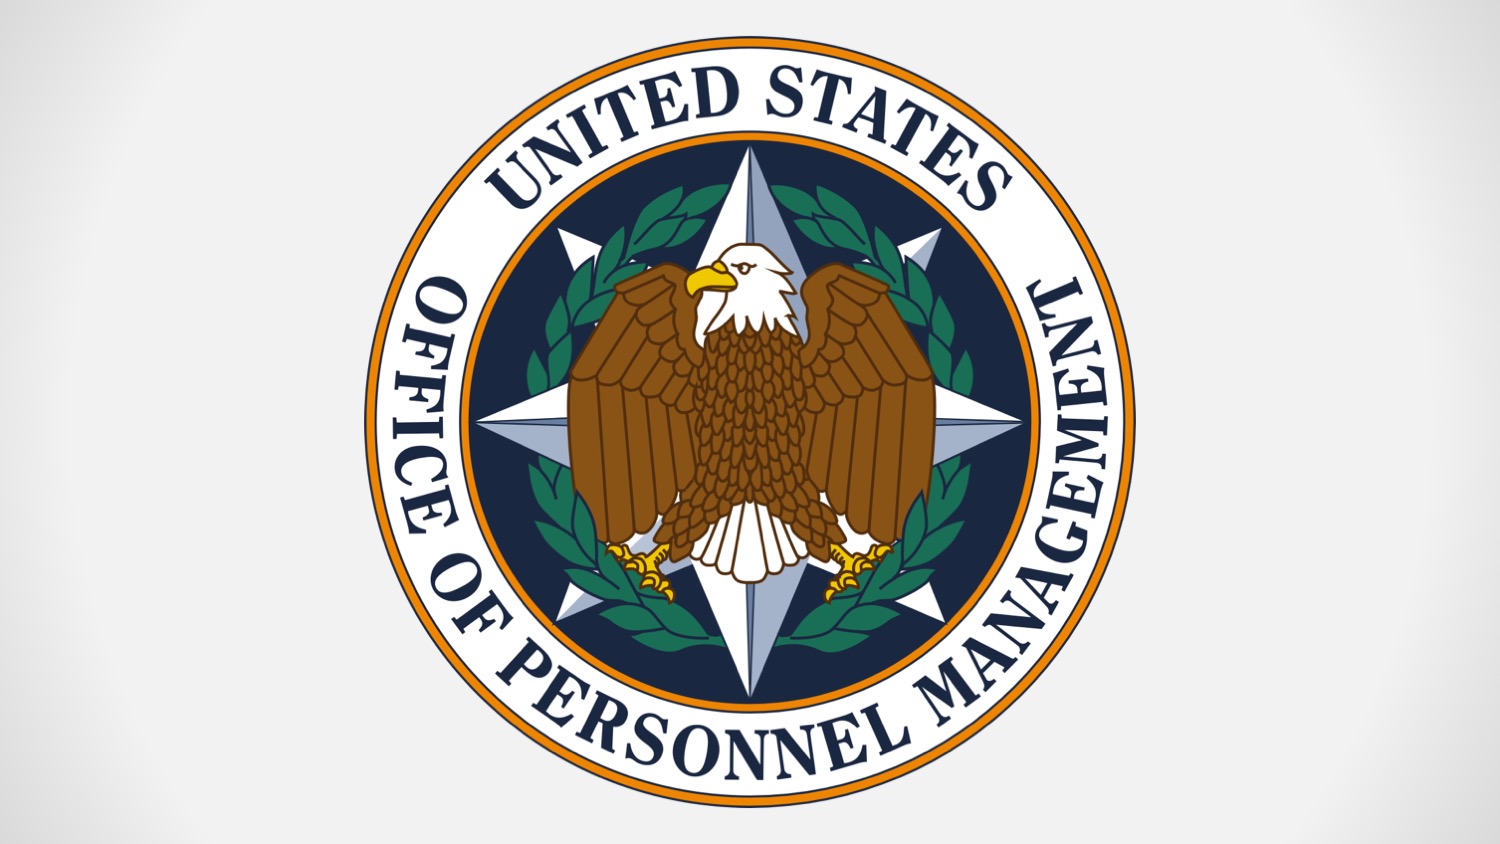 Office of Personnel Management logo